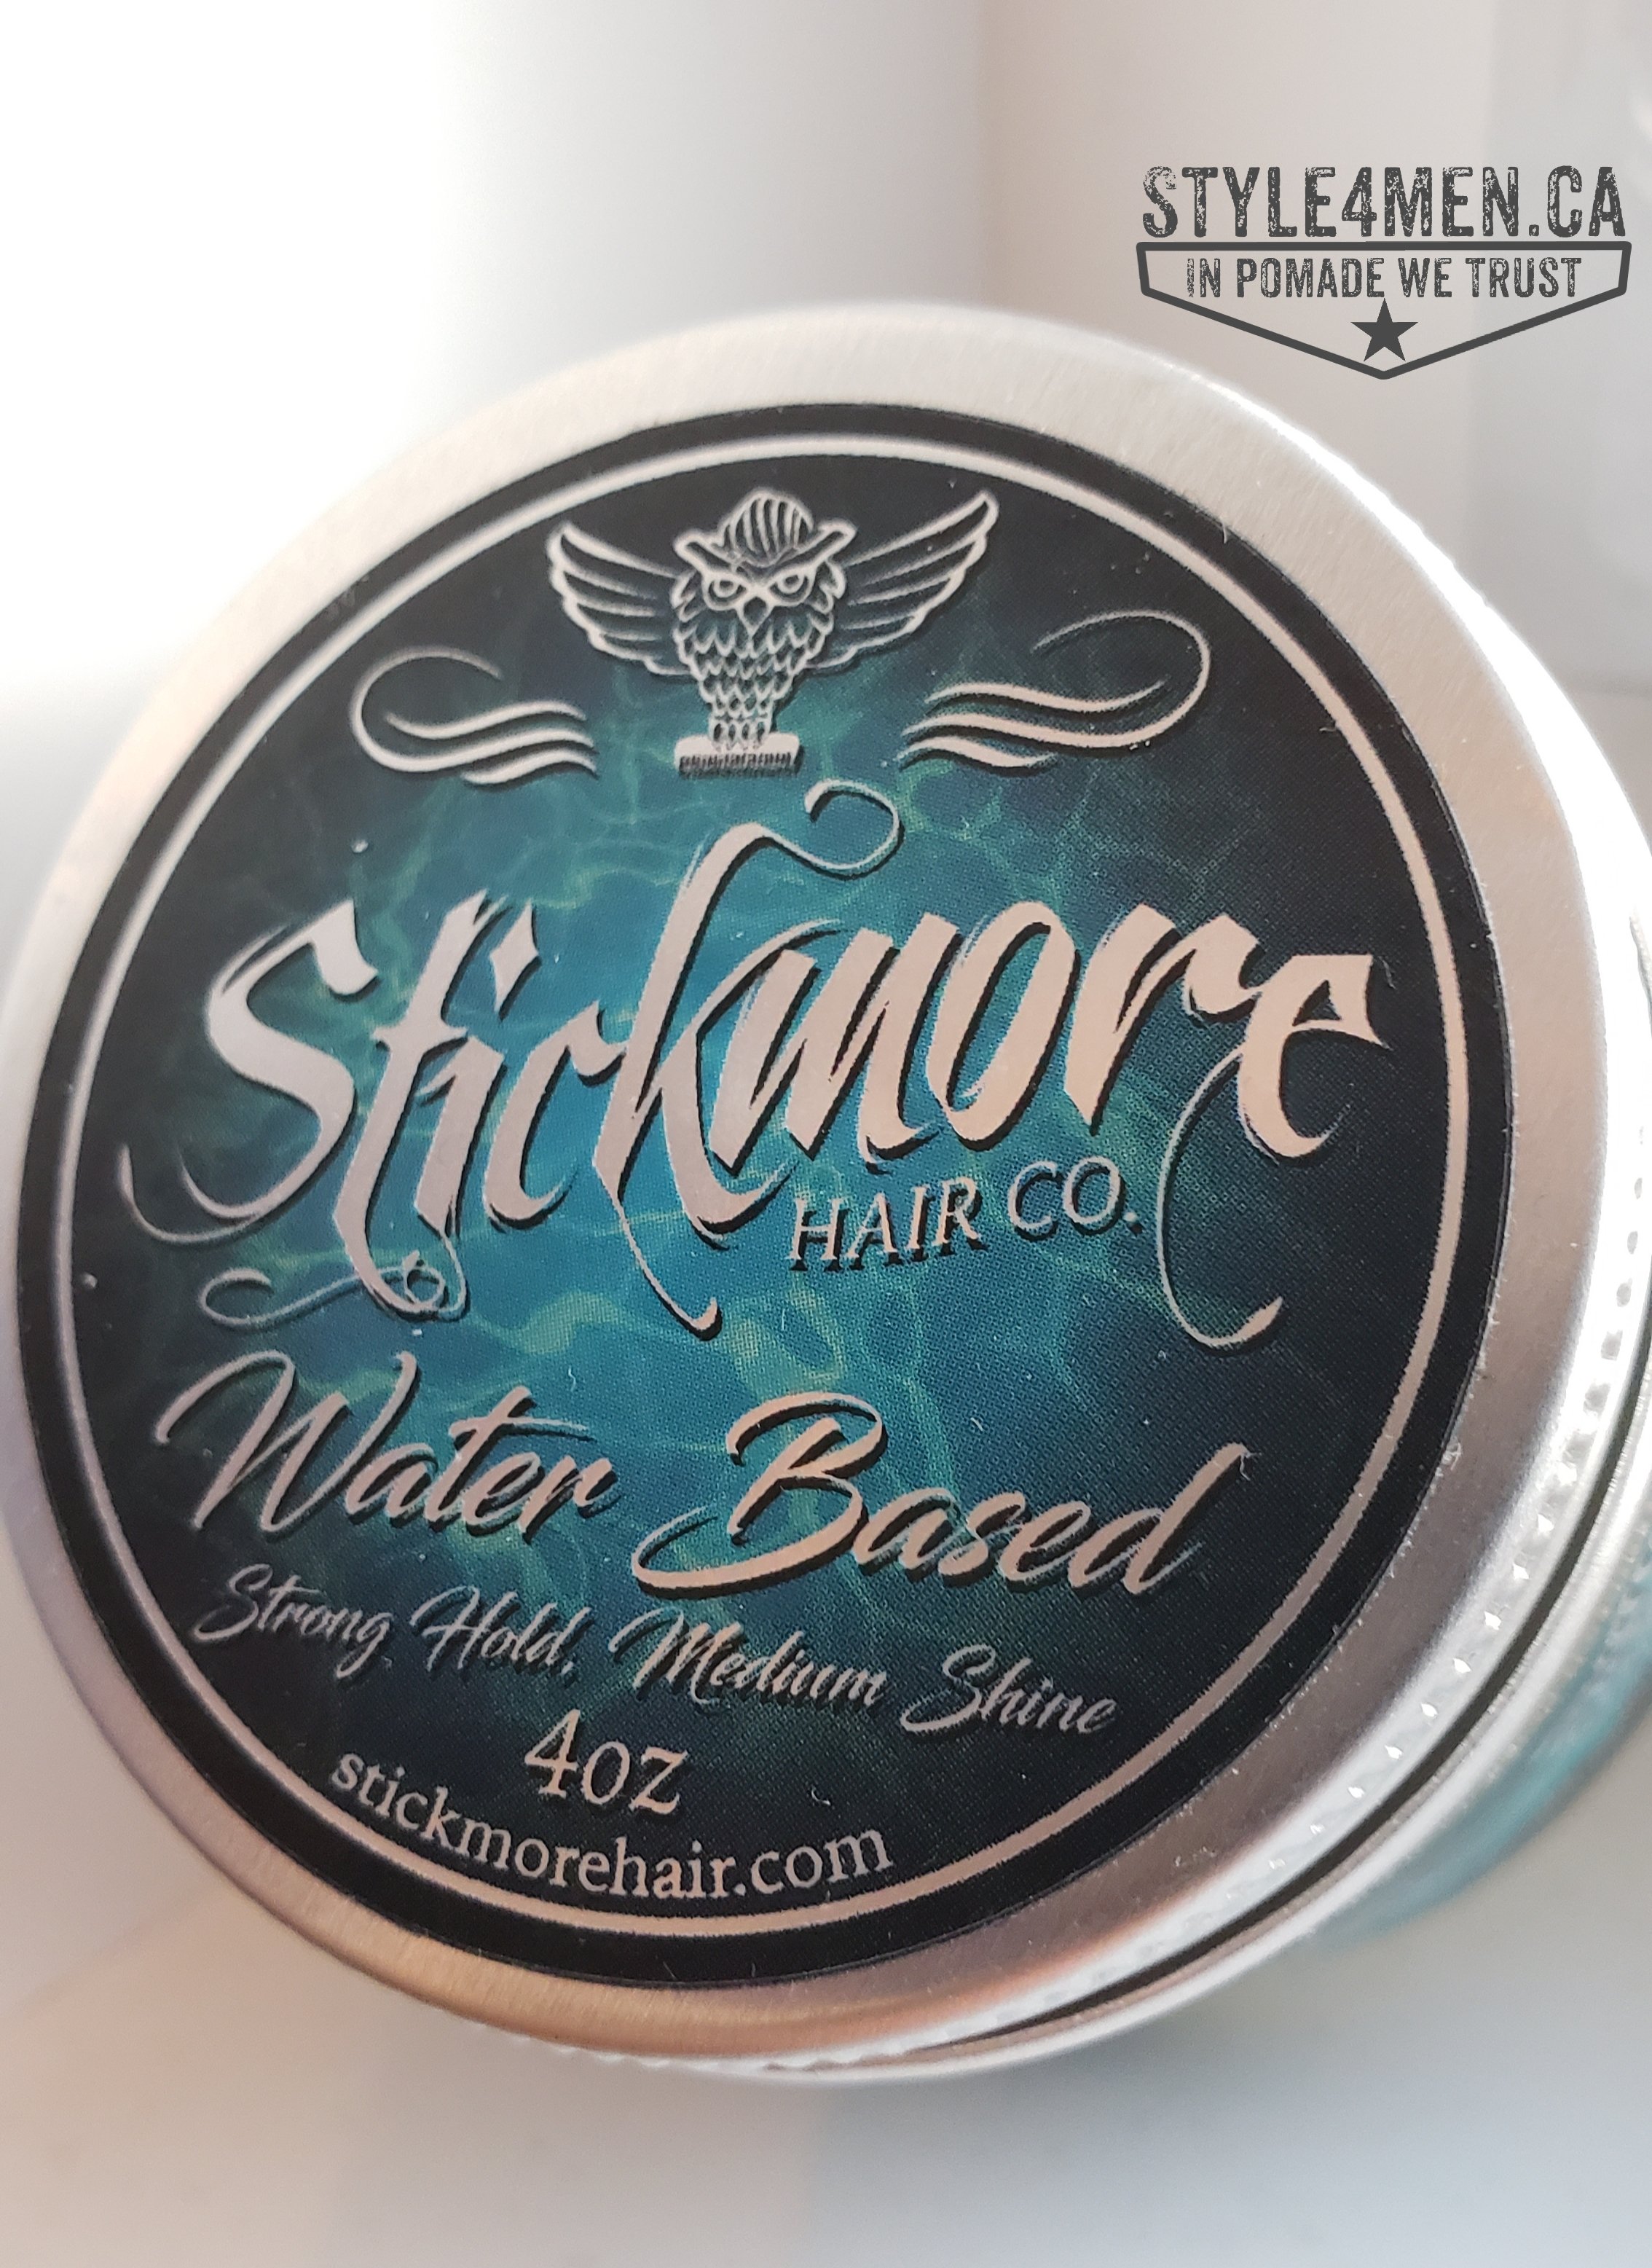 Stickmore Hair Water Based